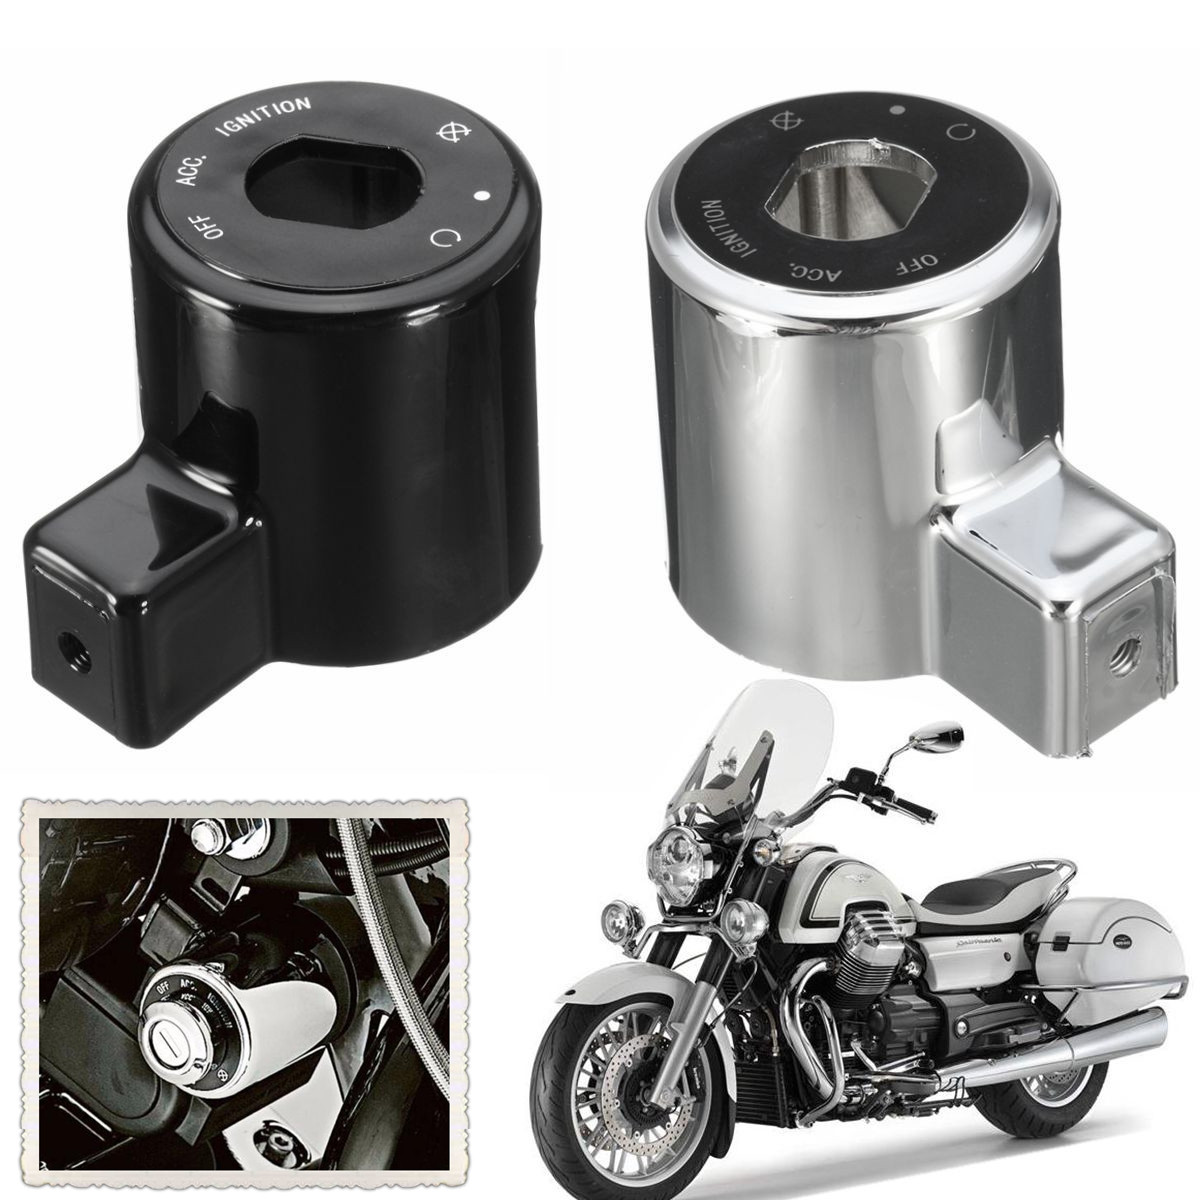 

Ignition Control Switch Cover Cap For Harley Sportster Iron XL 883 XL883N 1200